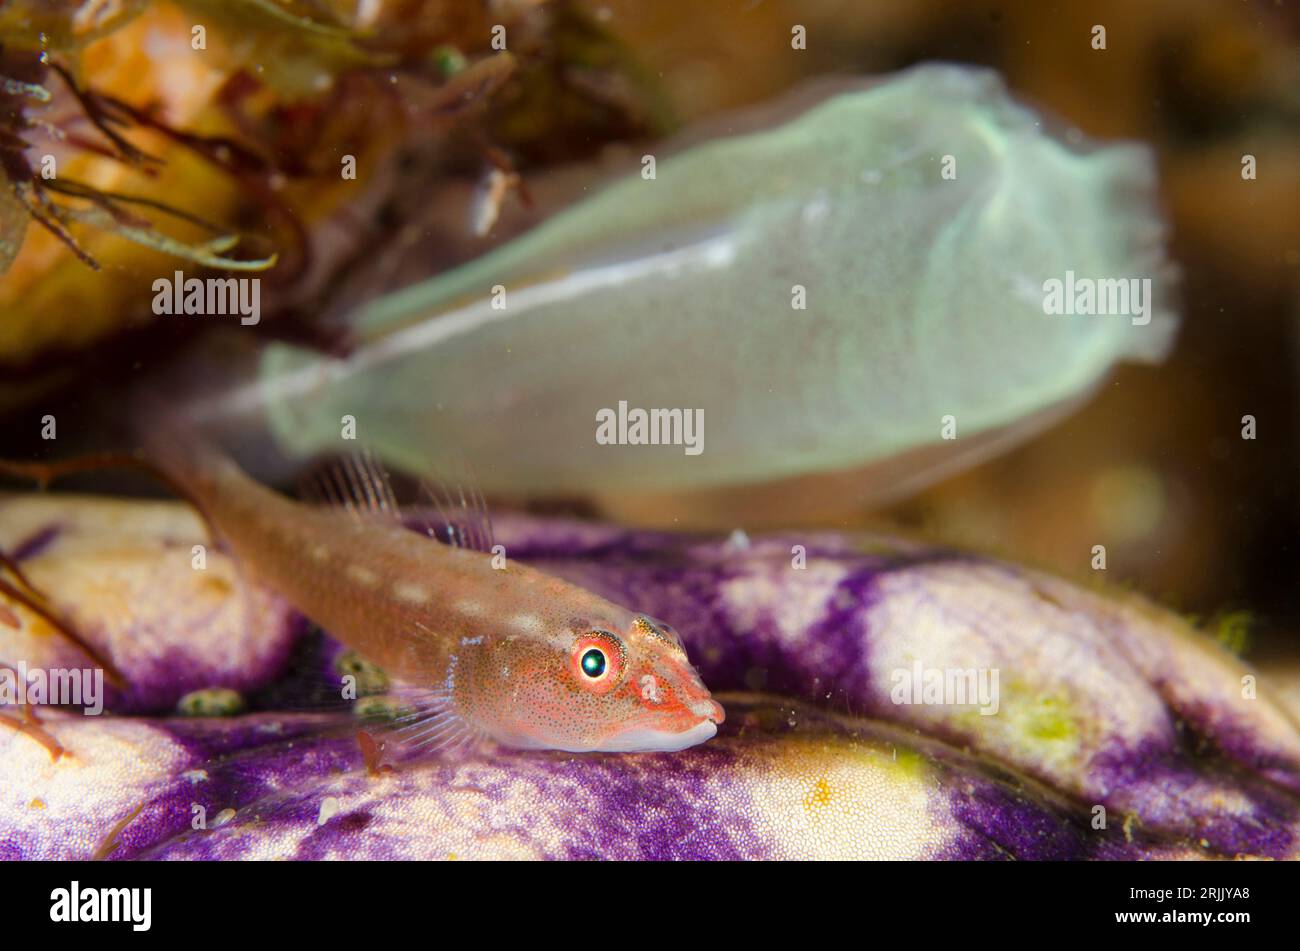 Common Ghost Goby, Pleurosicya mossambica, on Golden Sea Squirt, Polycarpa aurata, with Sea Squirt, Rhopalaea sp, in background, night dive, TK1 dive Stock Photo